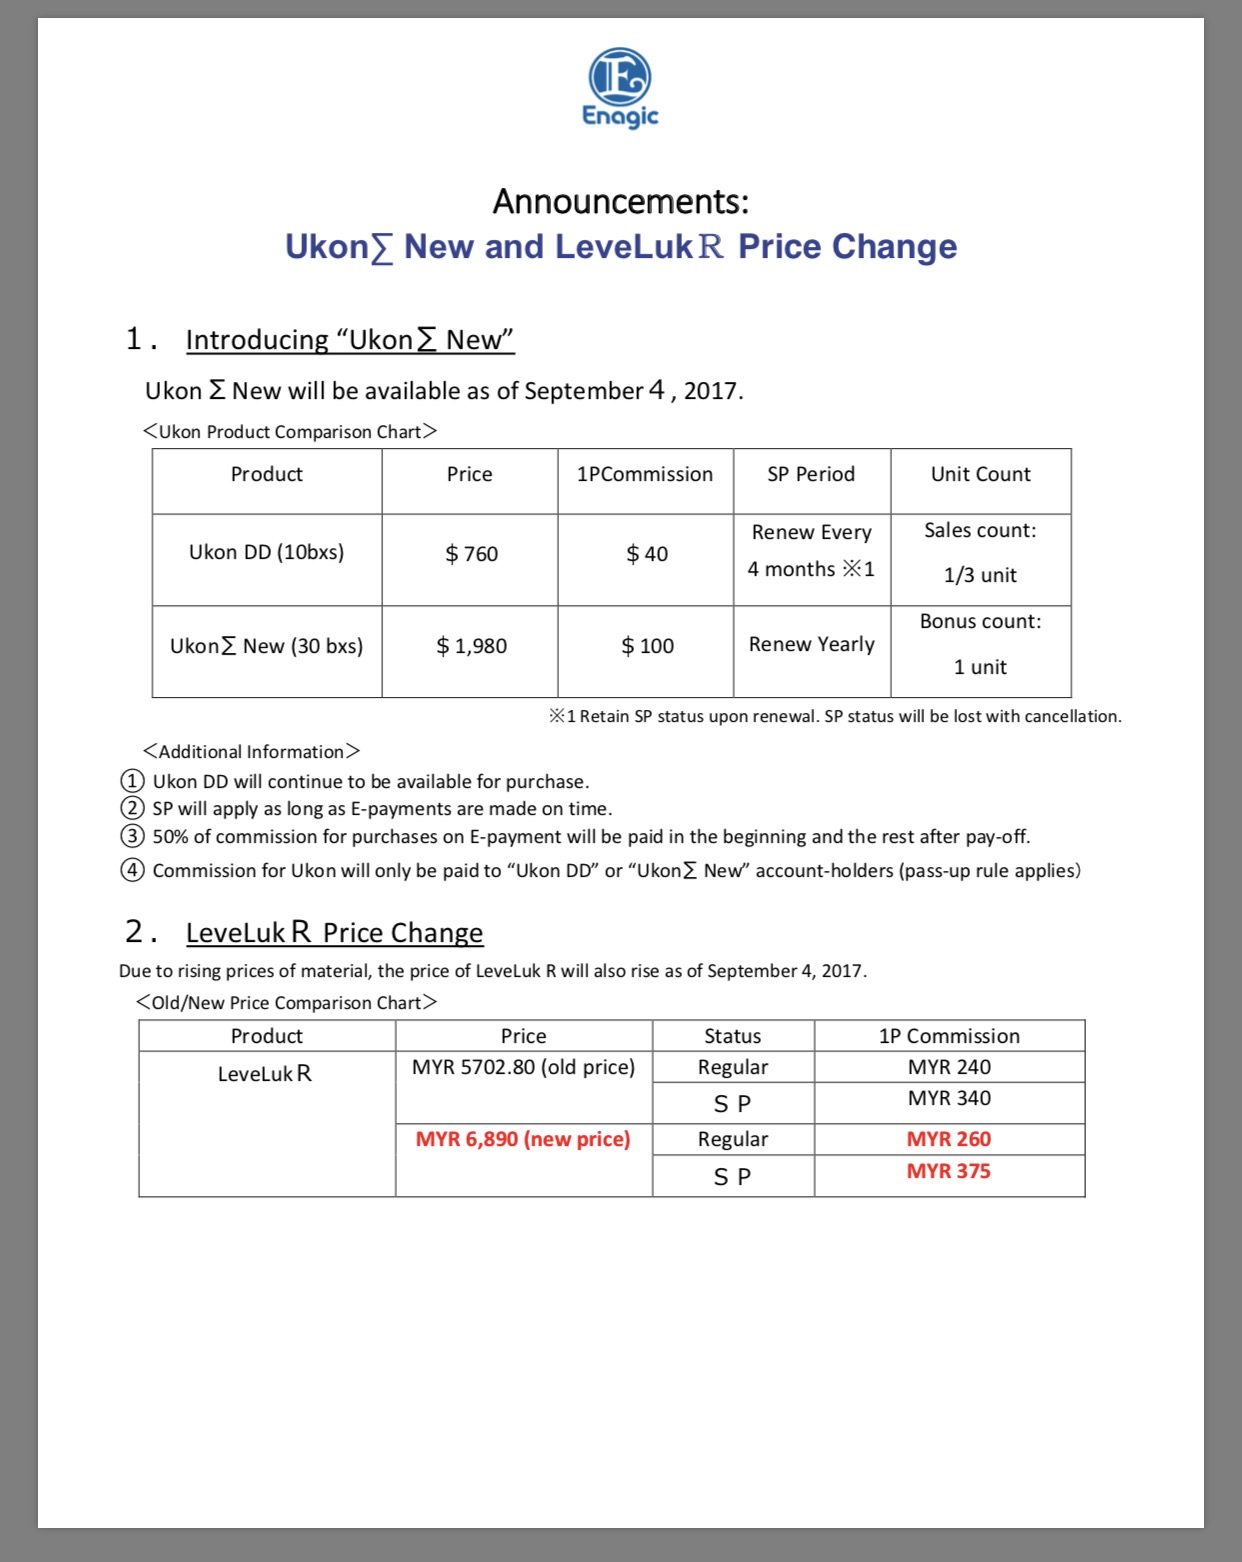 Announcements For Ukon Sigma New And LeveLuk R Price Change